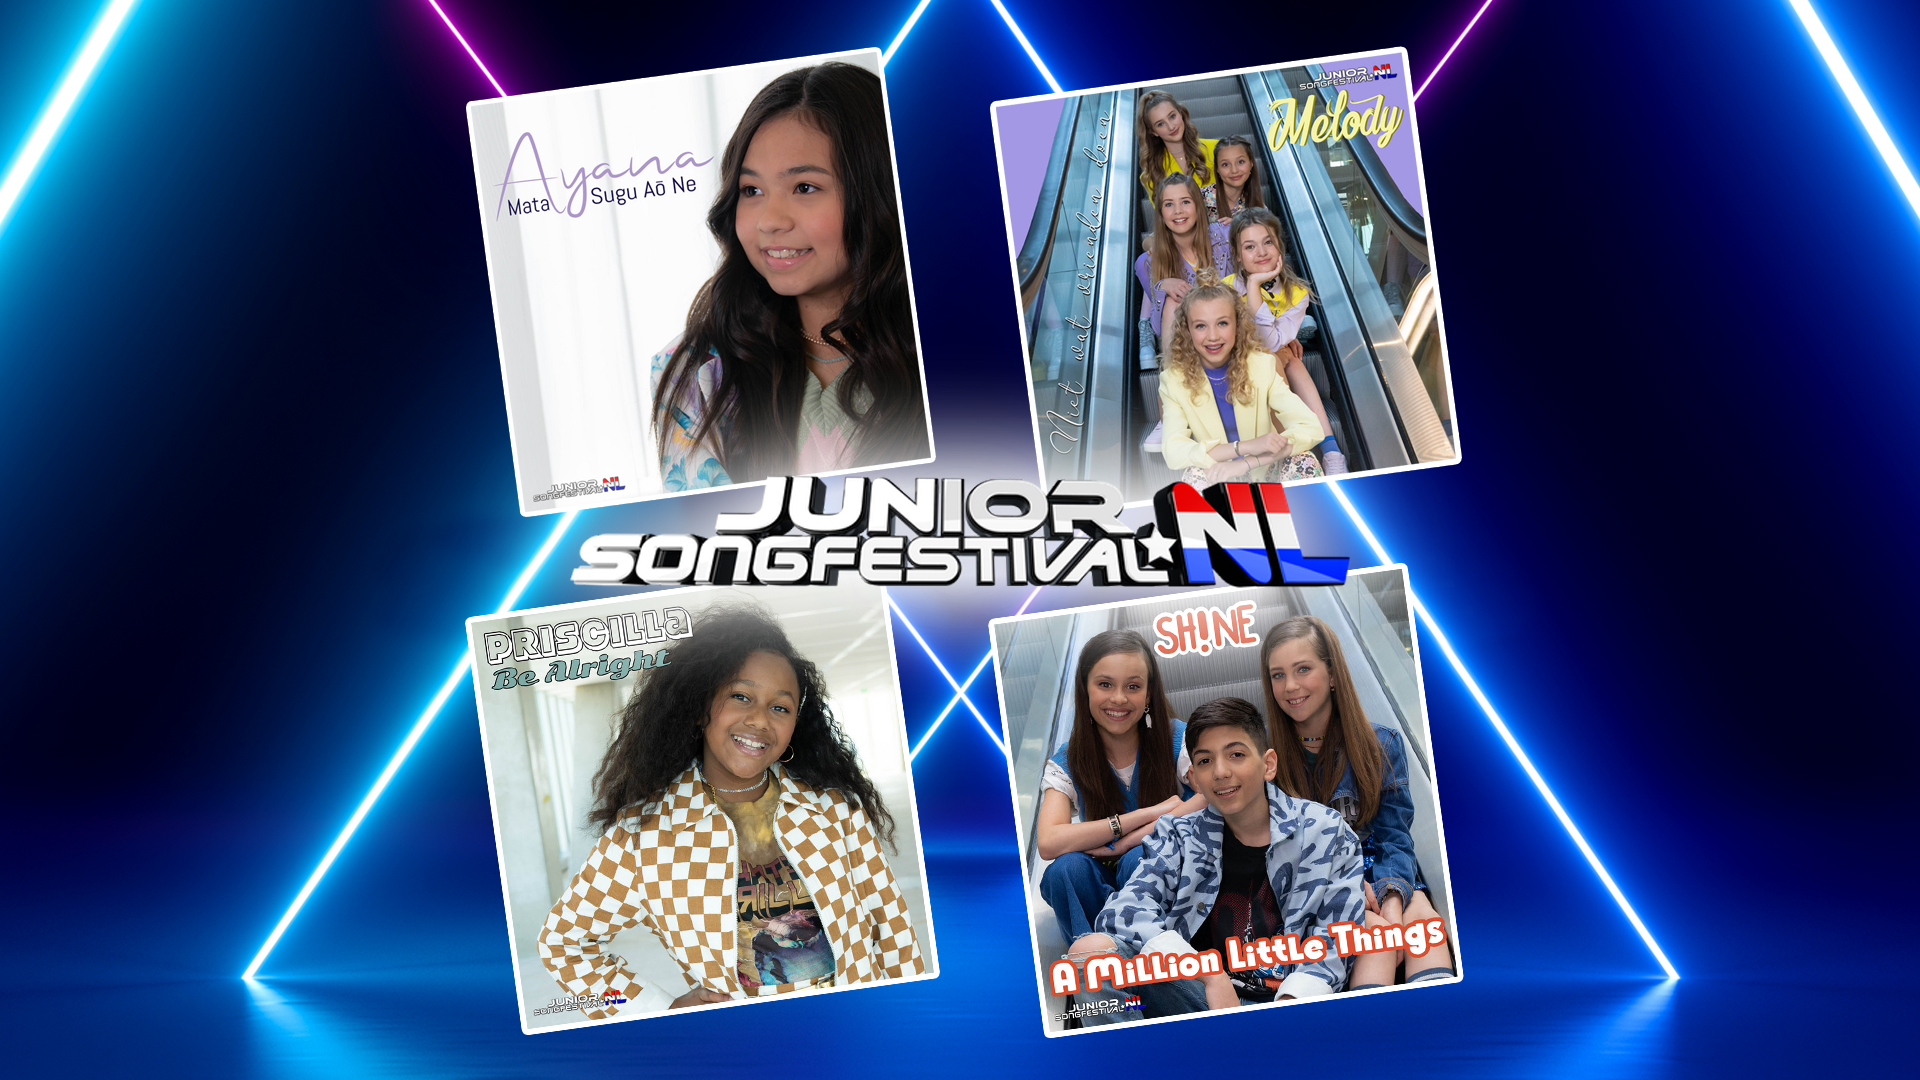 The Netherlands: Listen to the four songs competing at Junior Songfestival 2021